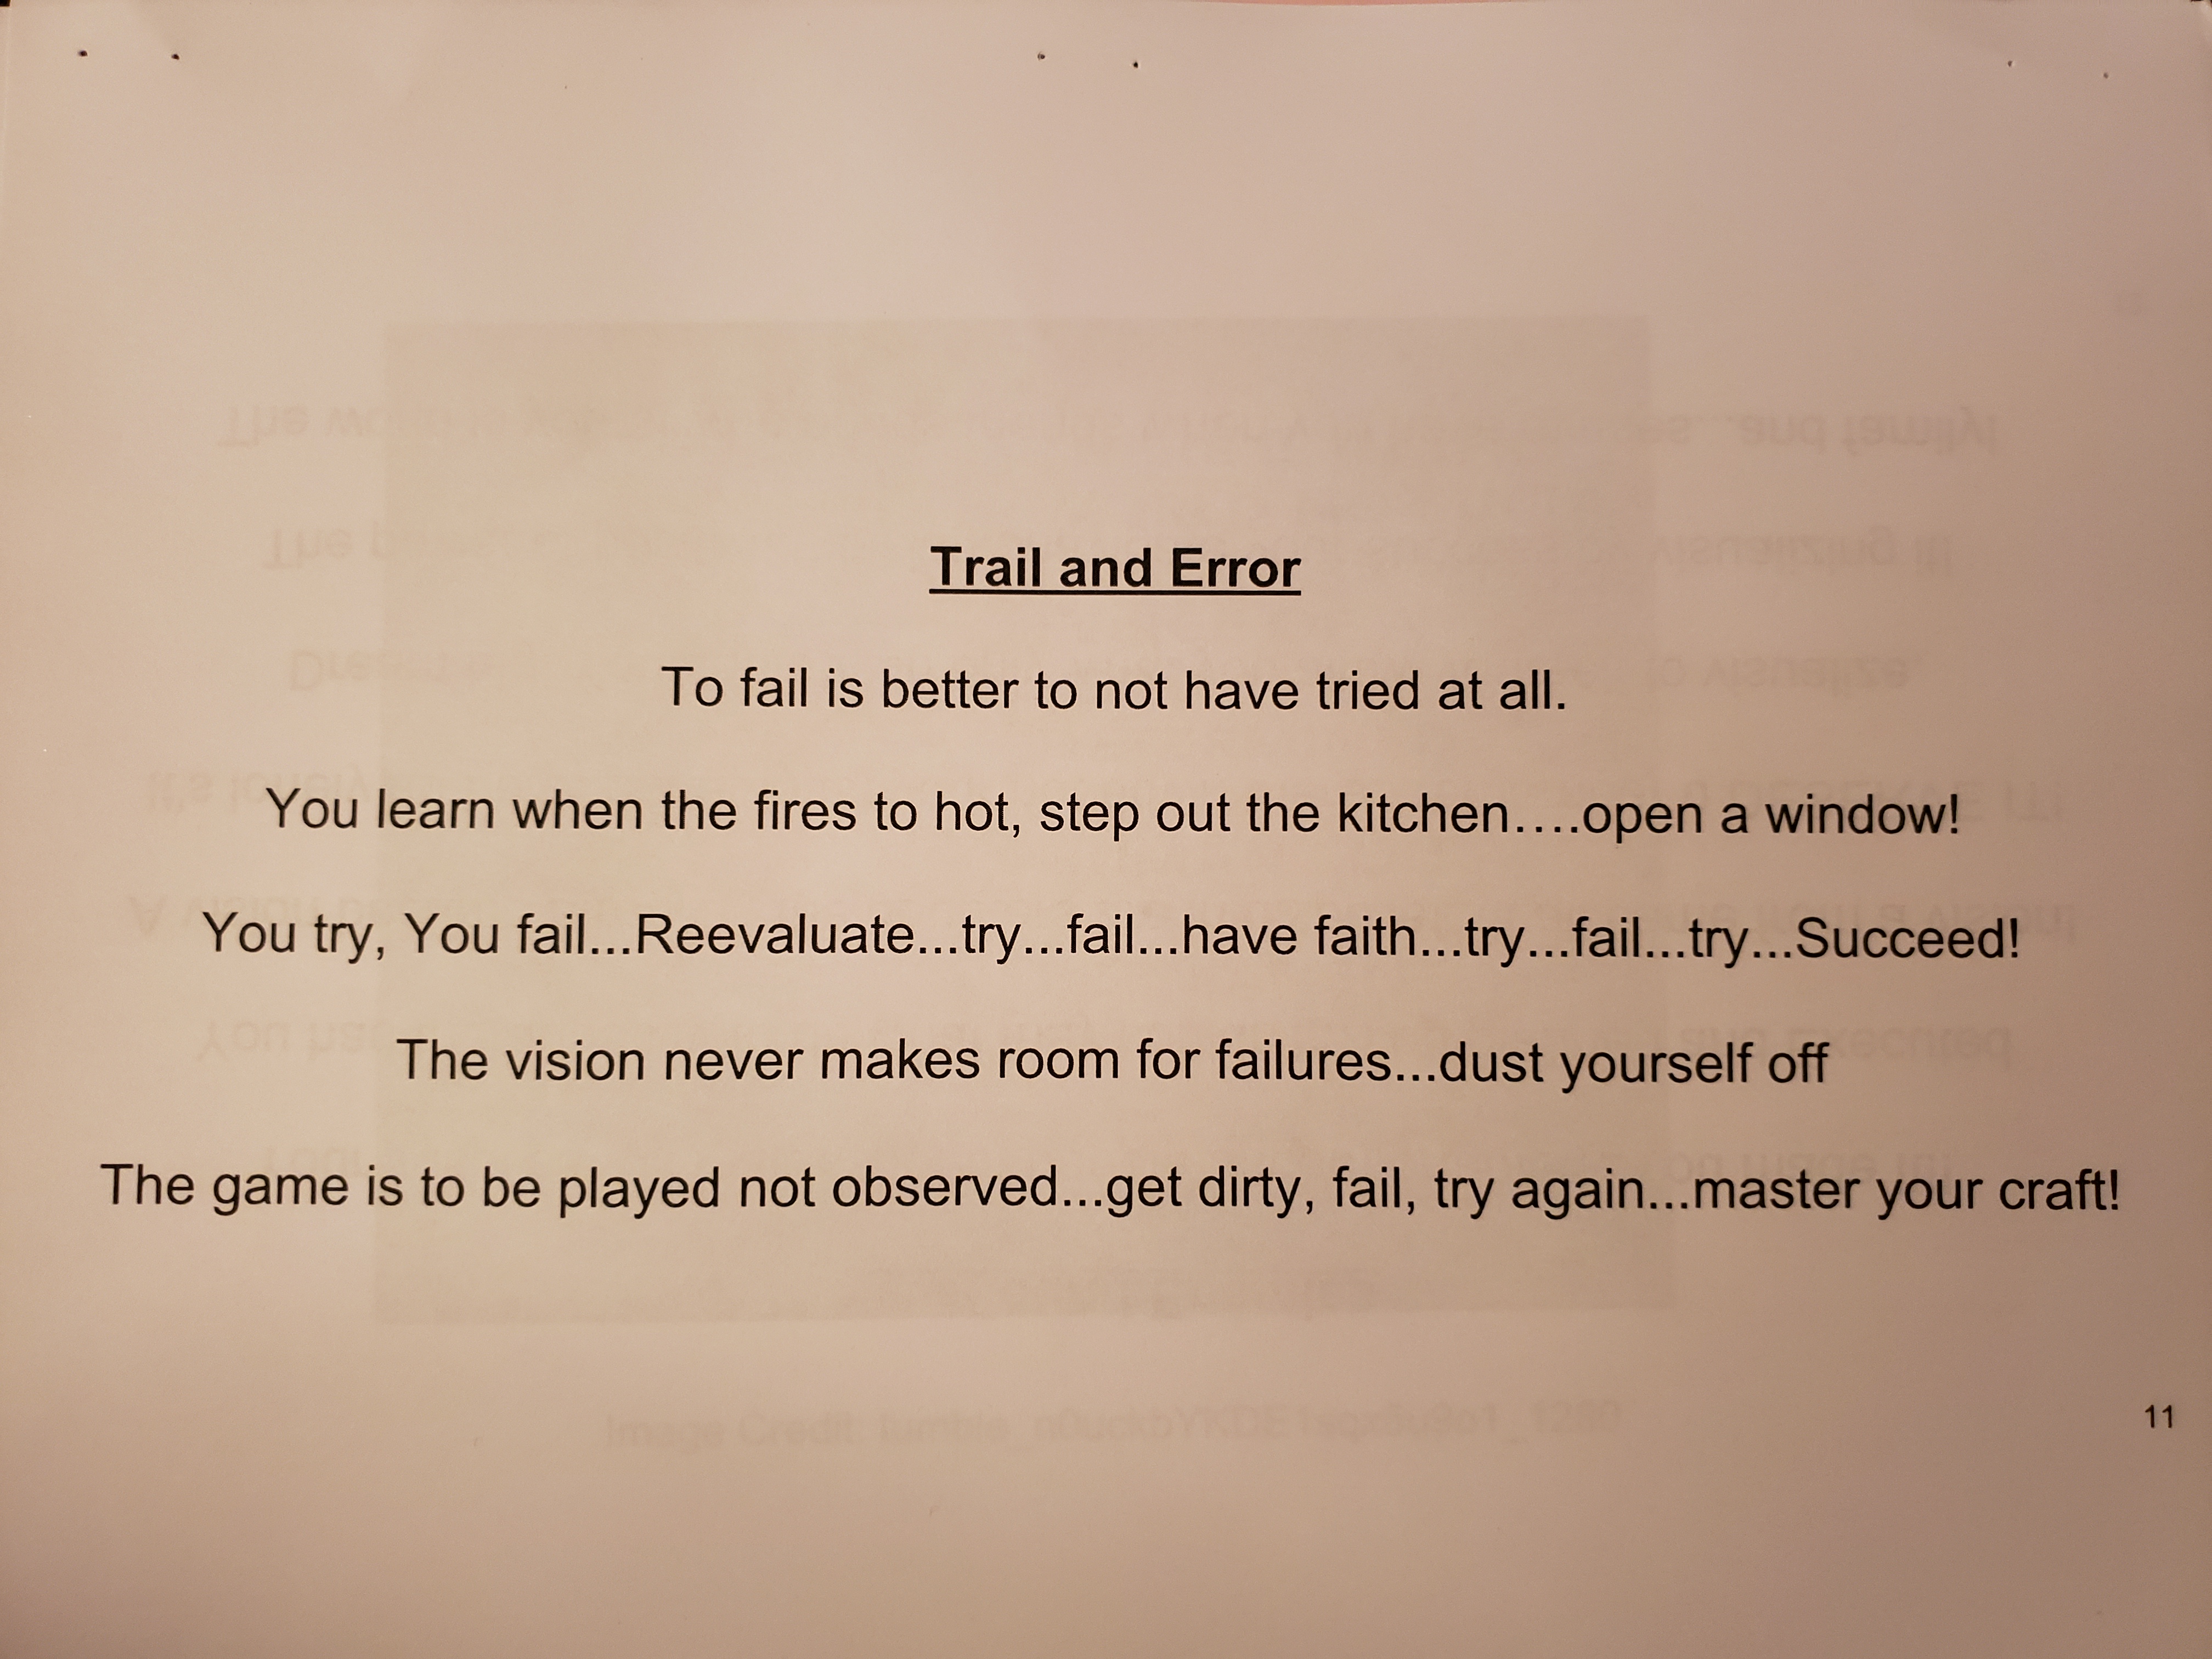 A poem to remind you that every entrepreneur experiences Trial and Error